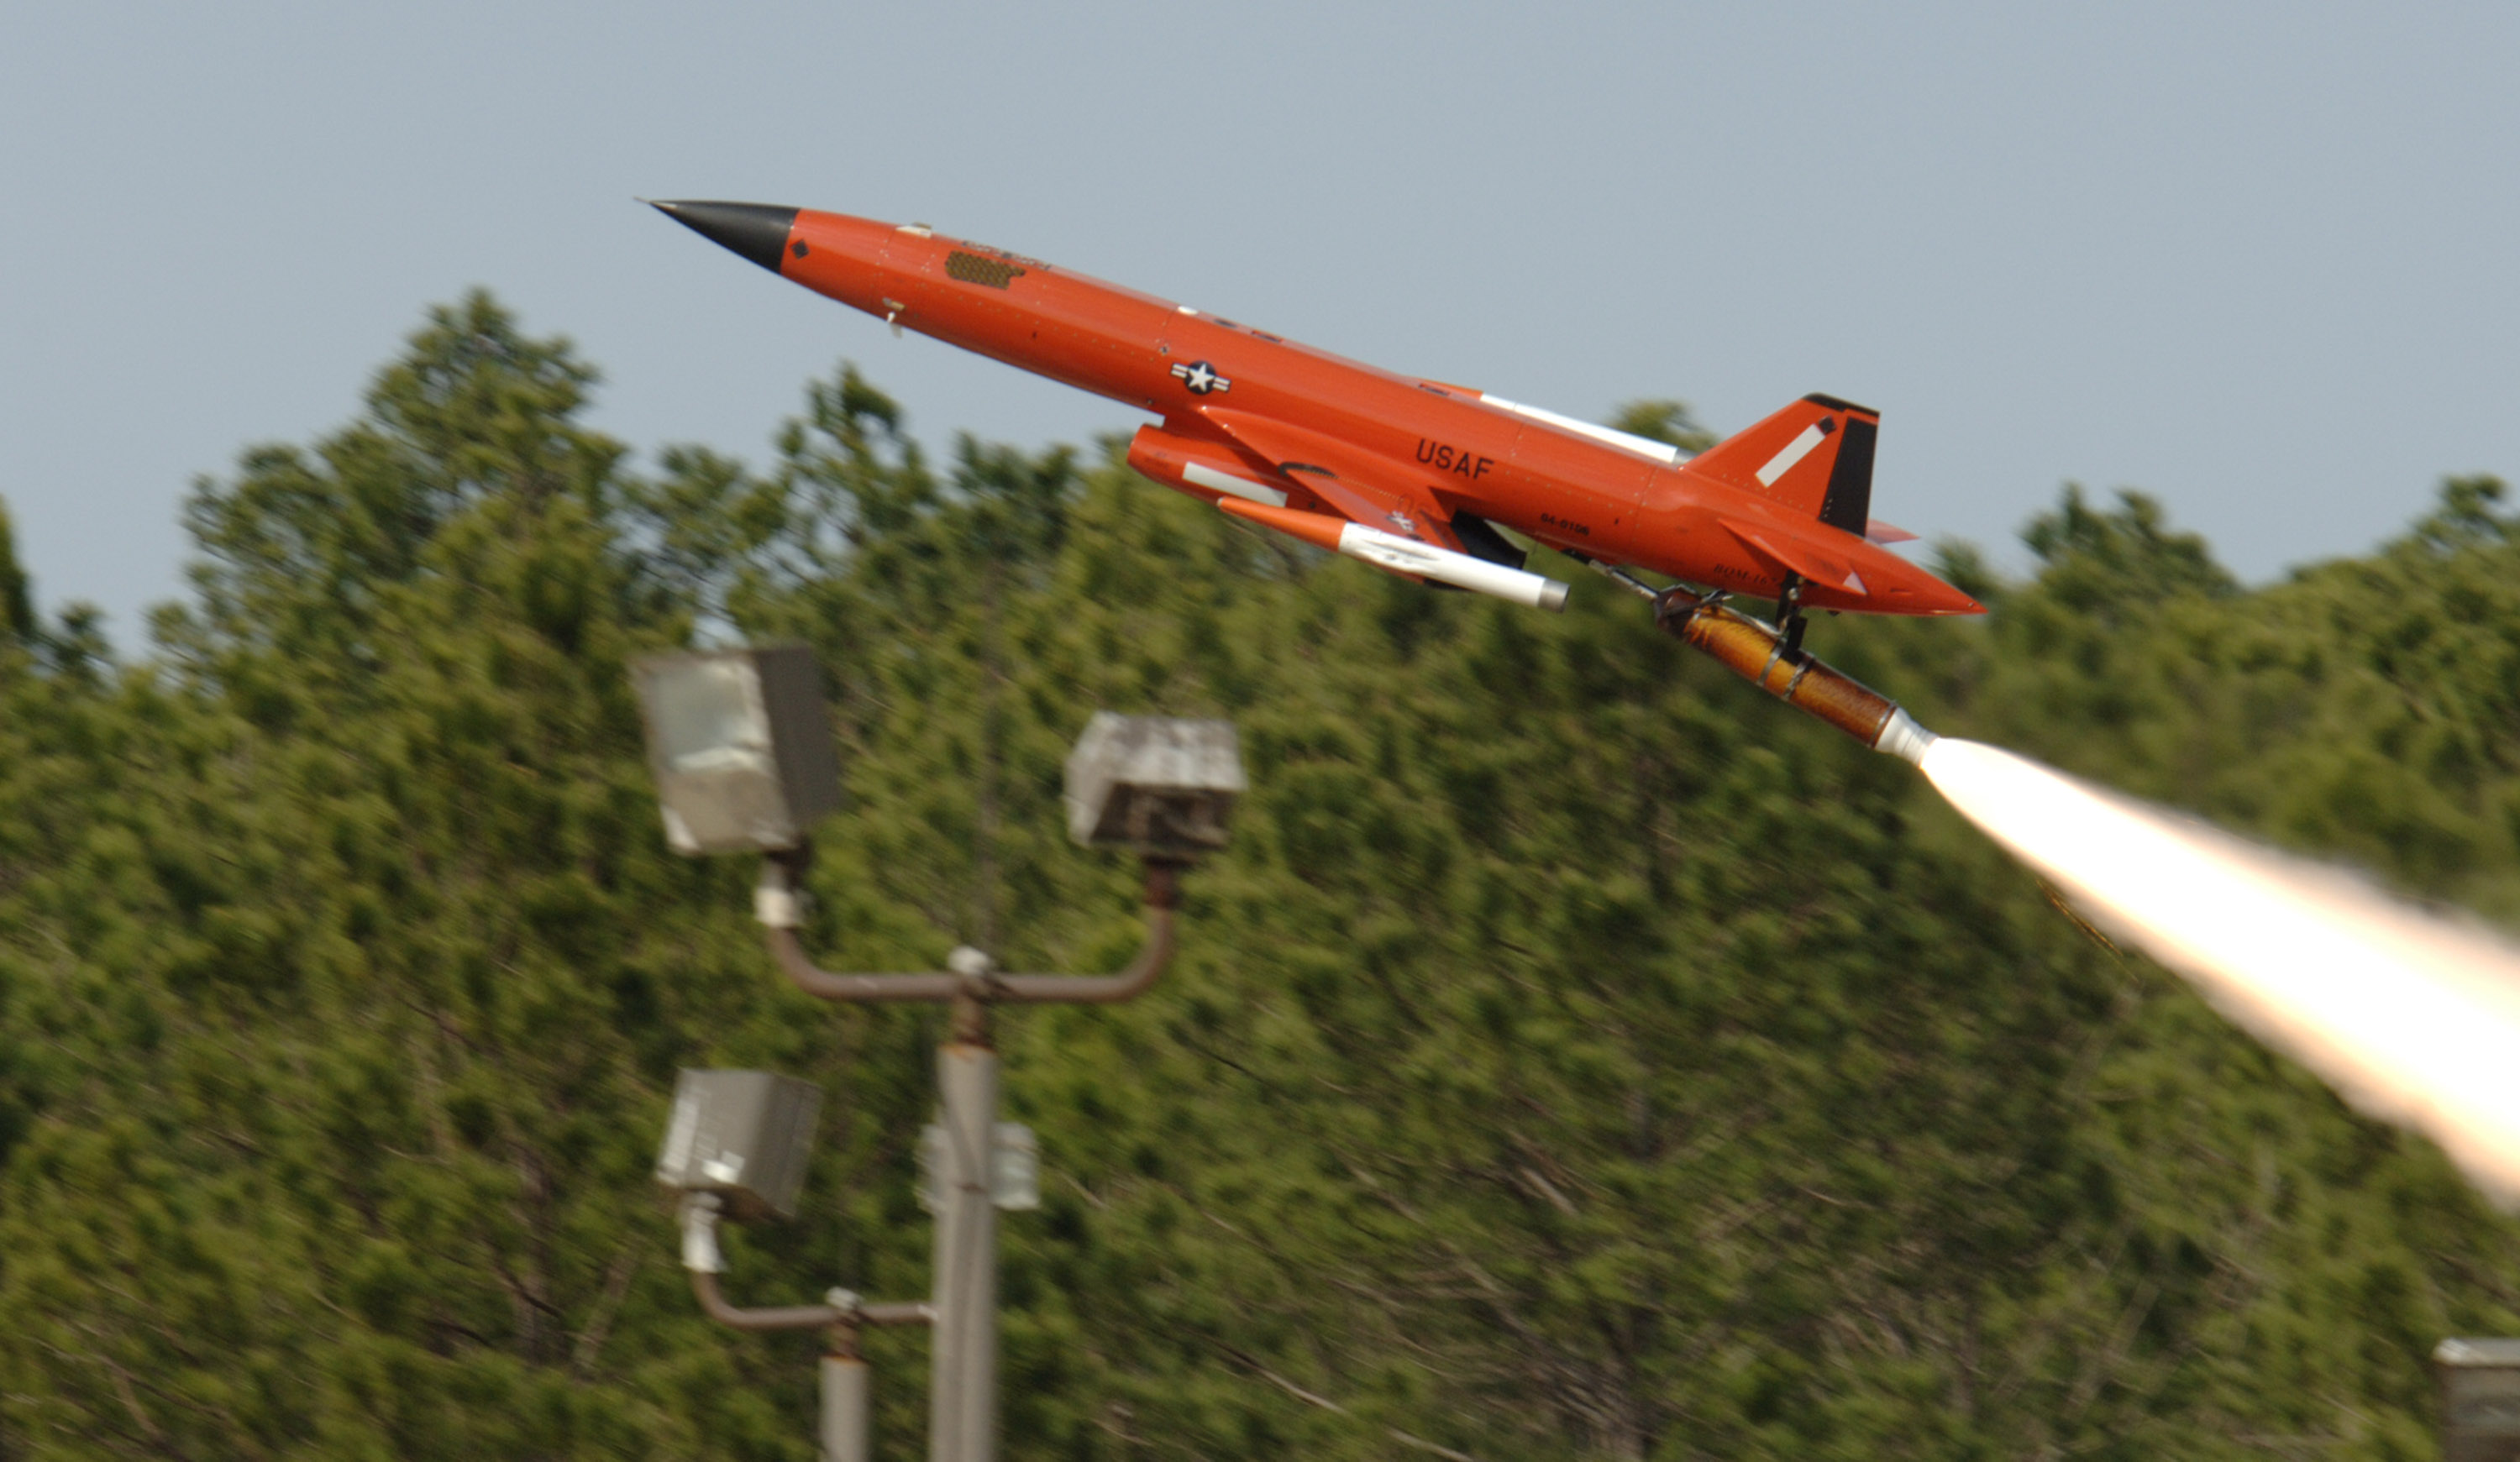 Kratos received $21.7m to supply BQM-167A drones to the US Air Force